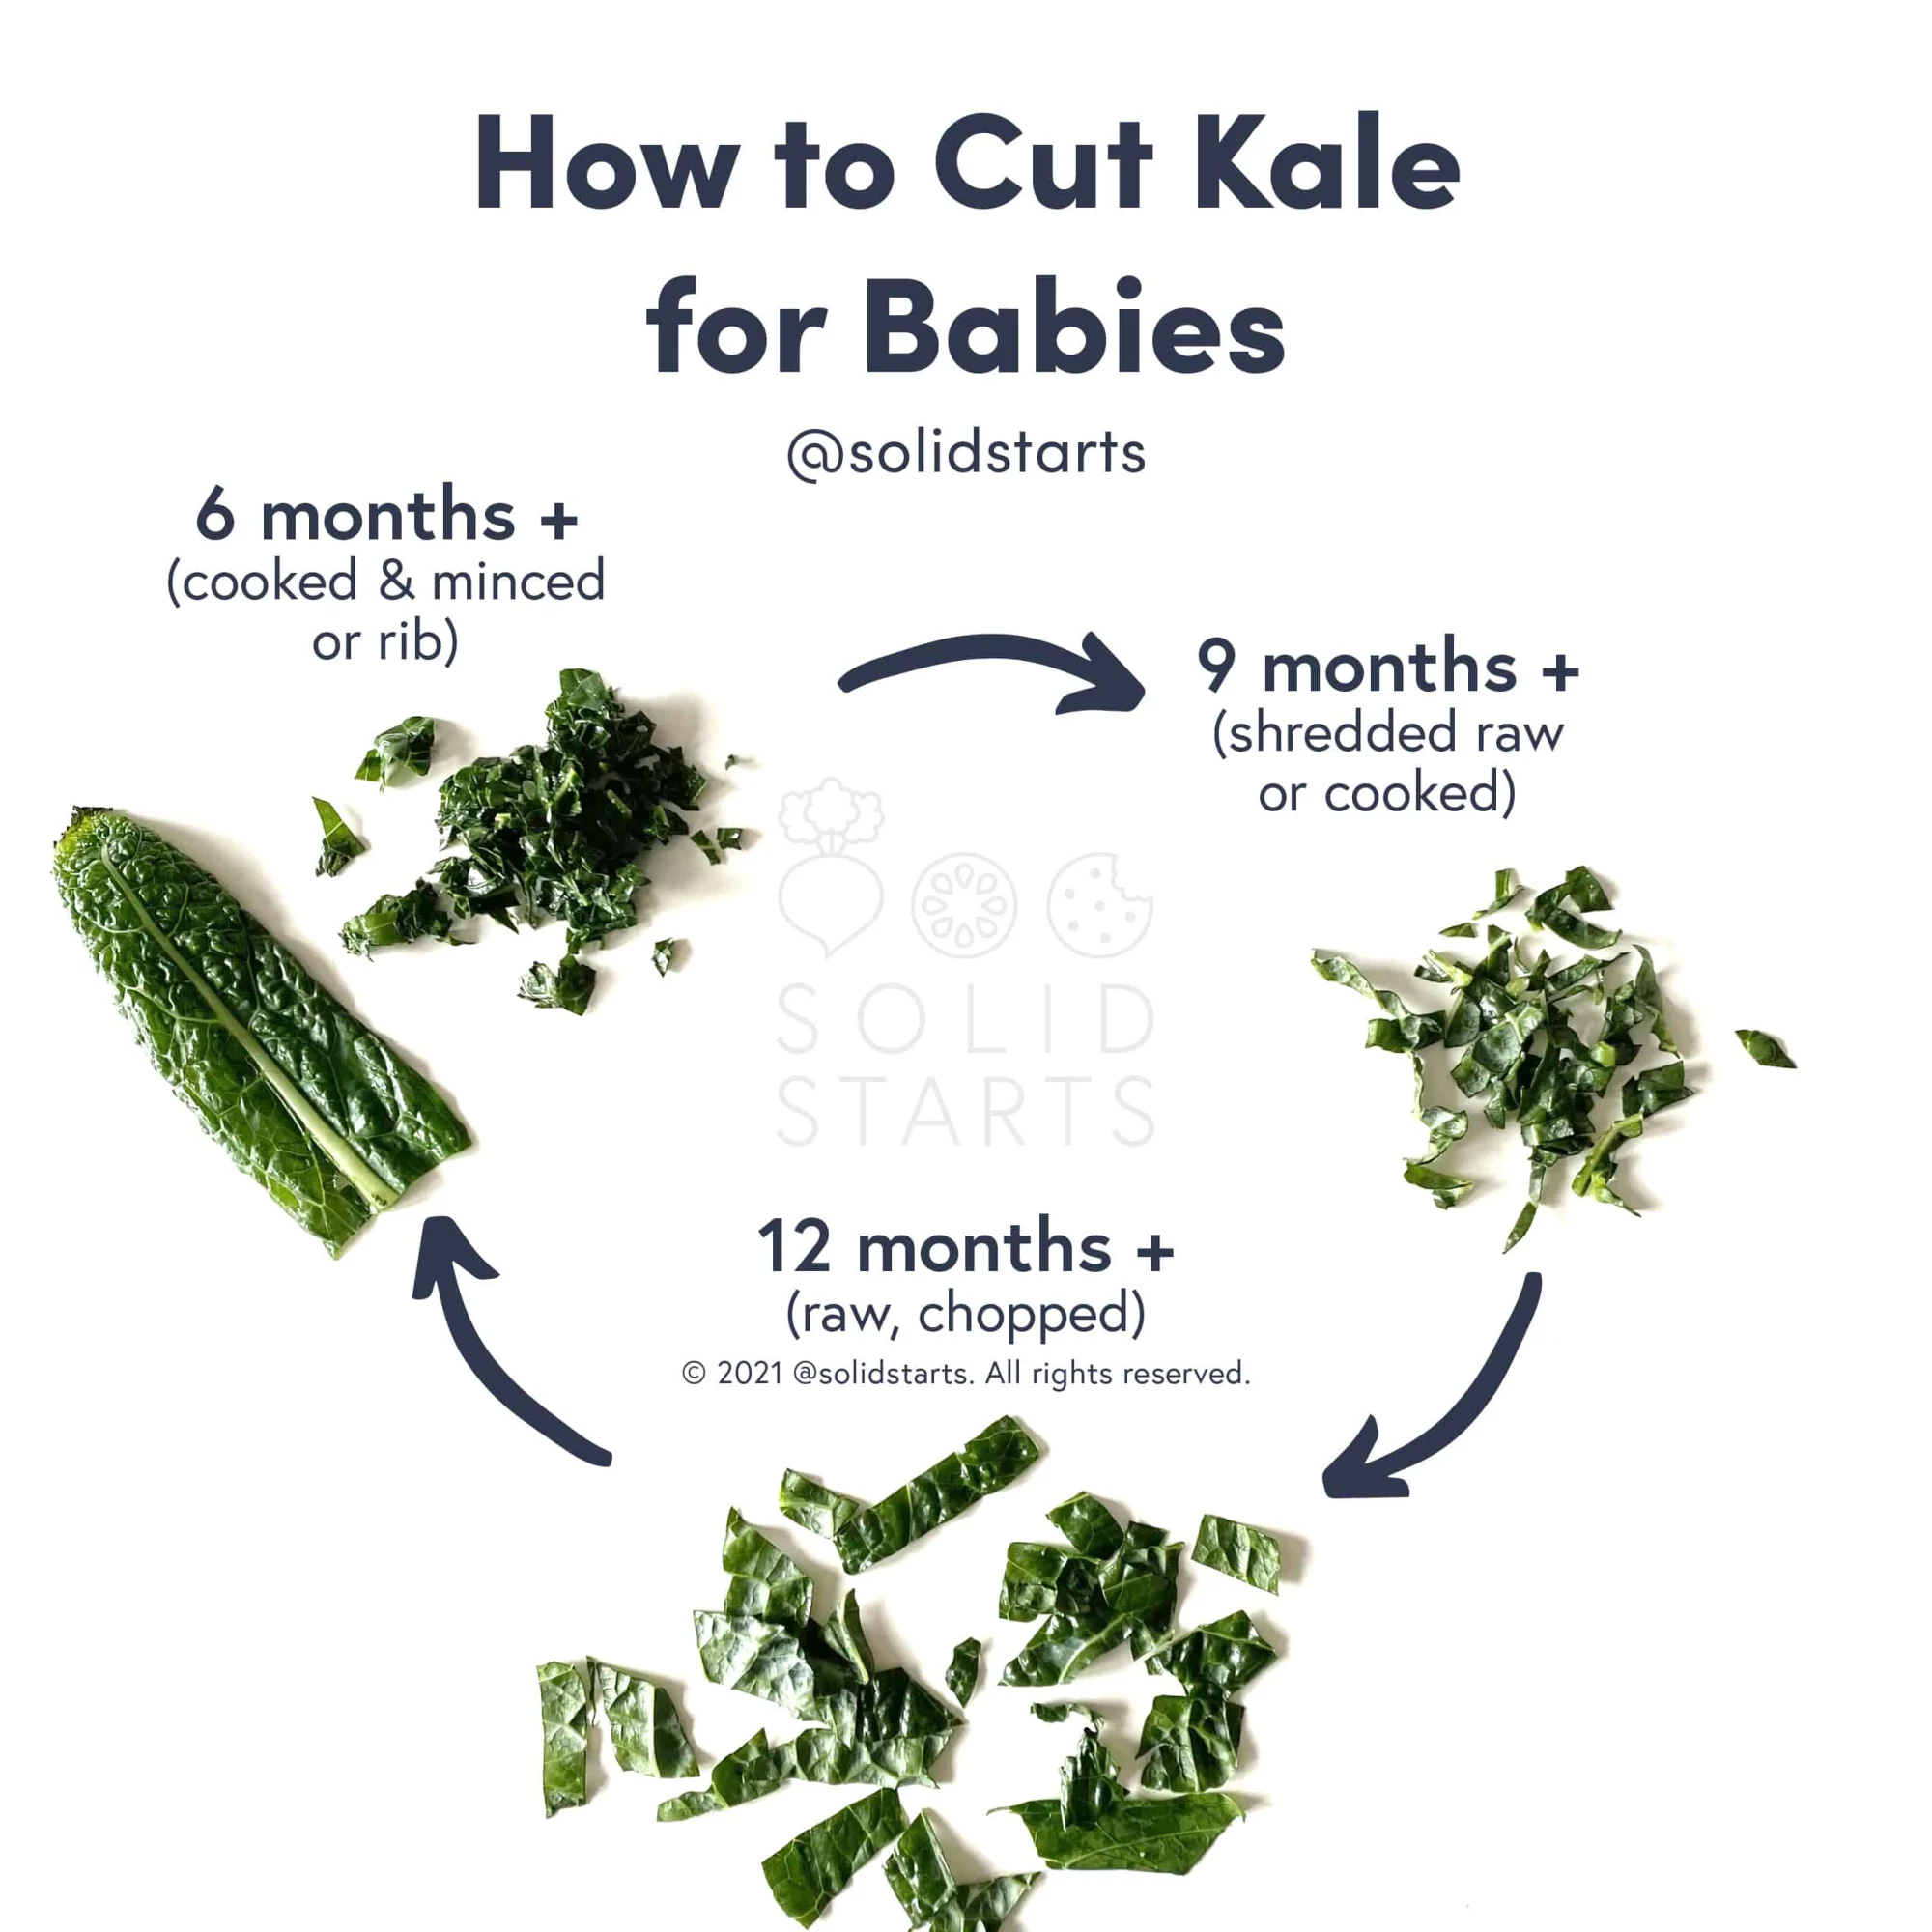 infographic showing how to cut kale for babies: cooked and minced kale or a whole rib for 6 months+, raw or cooked shredded kale for 9 months+, and raw chopped kale for 12 months +